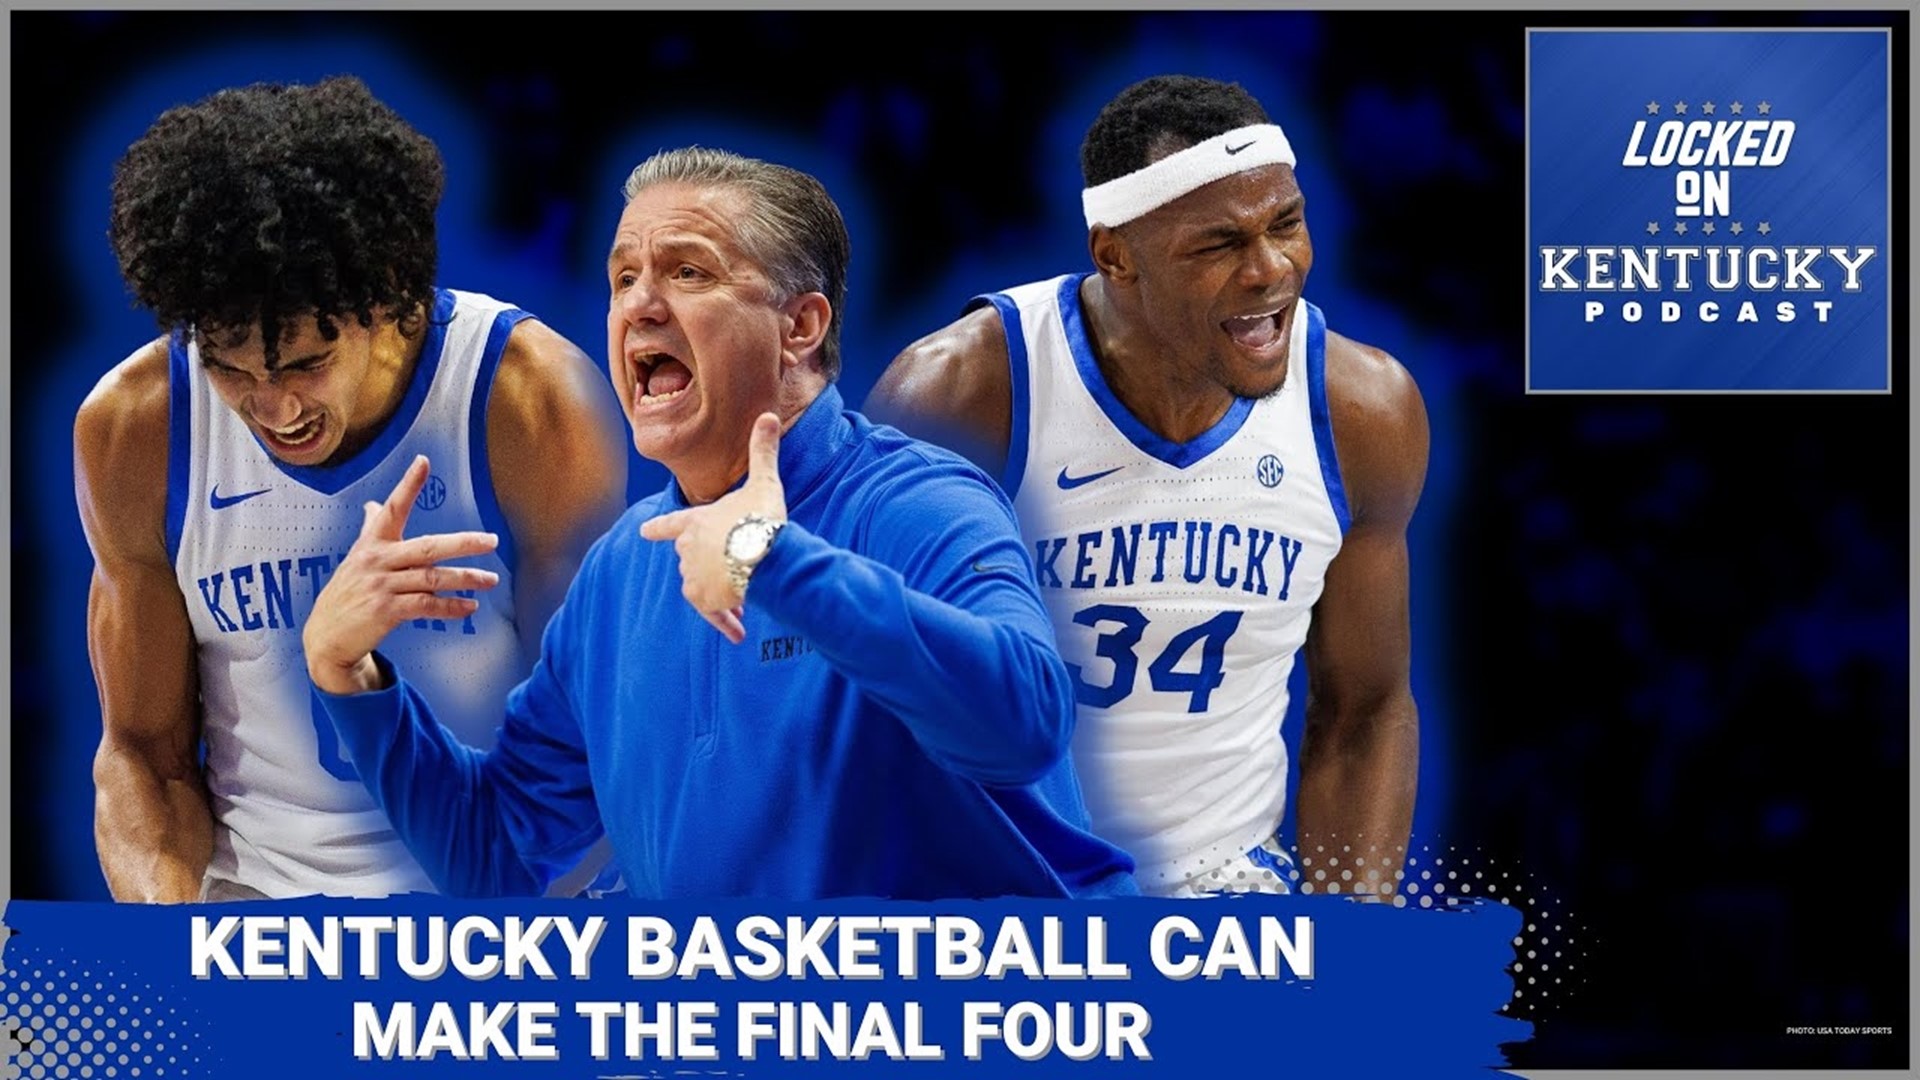 Could the Kentucky Wildcats actually get to the Final Four this season?